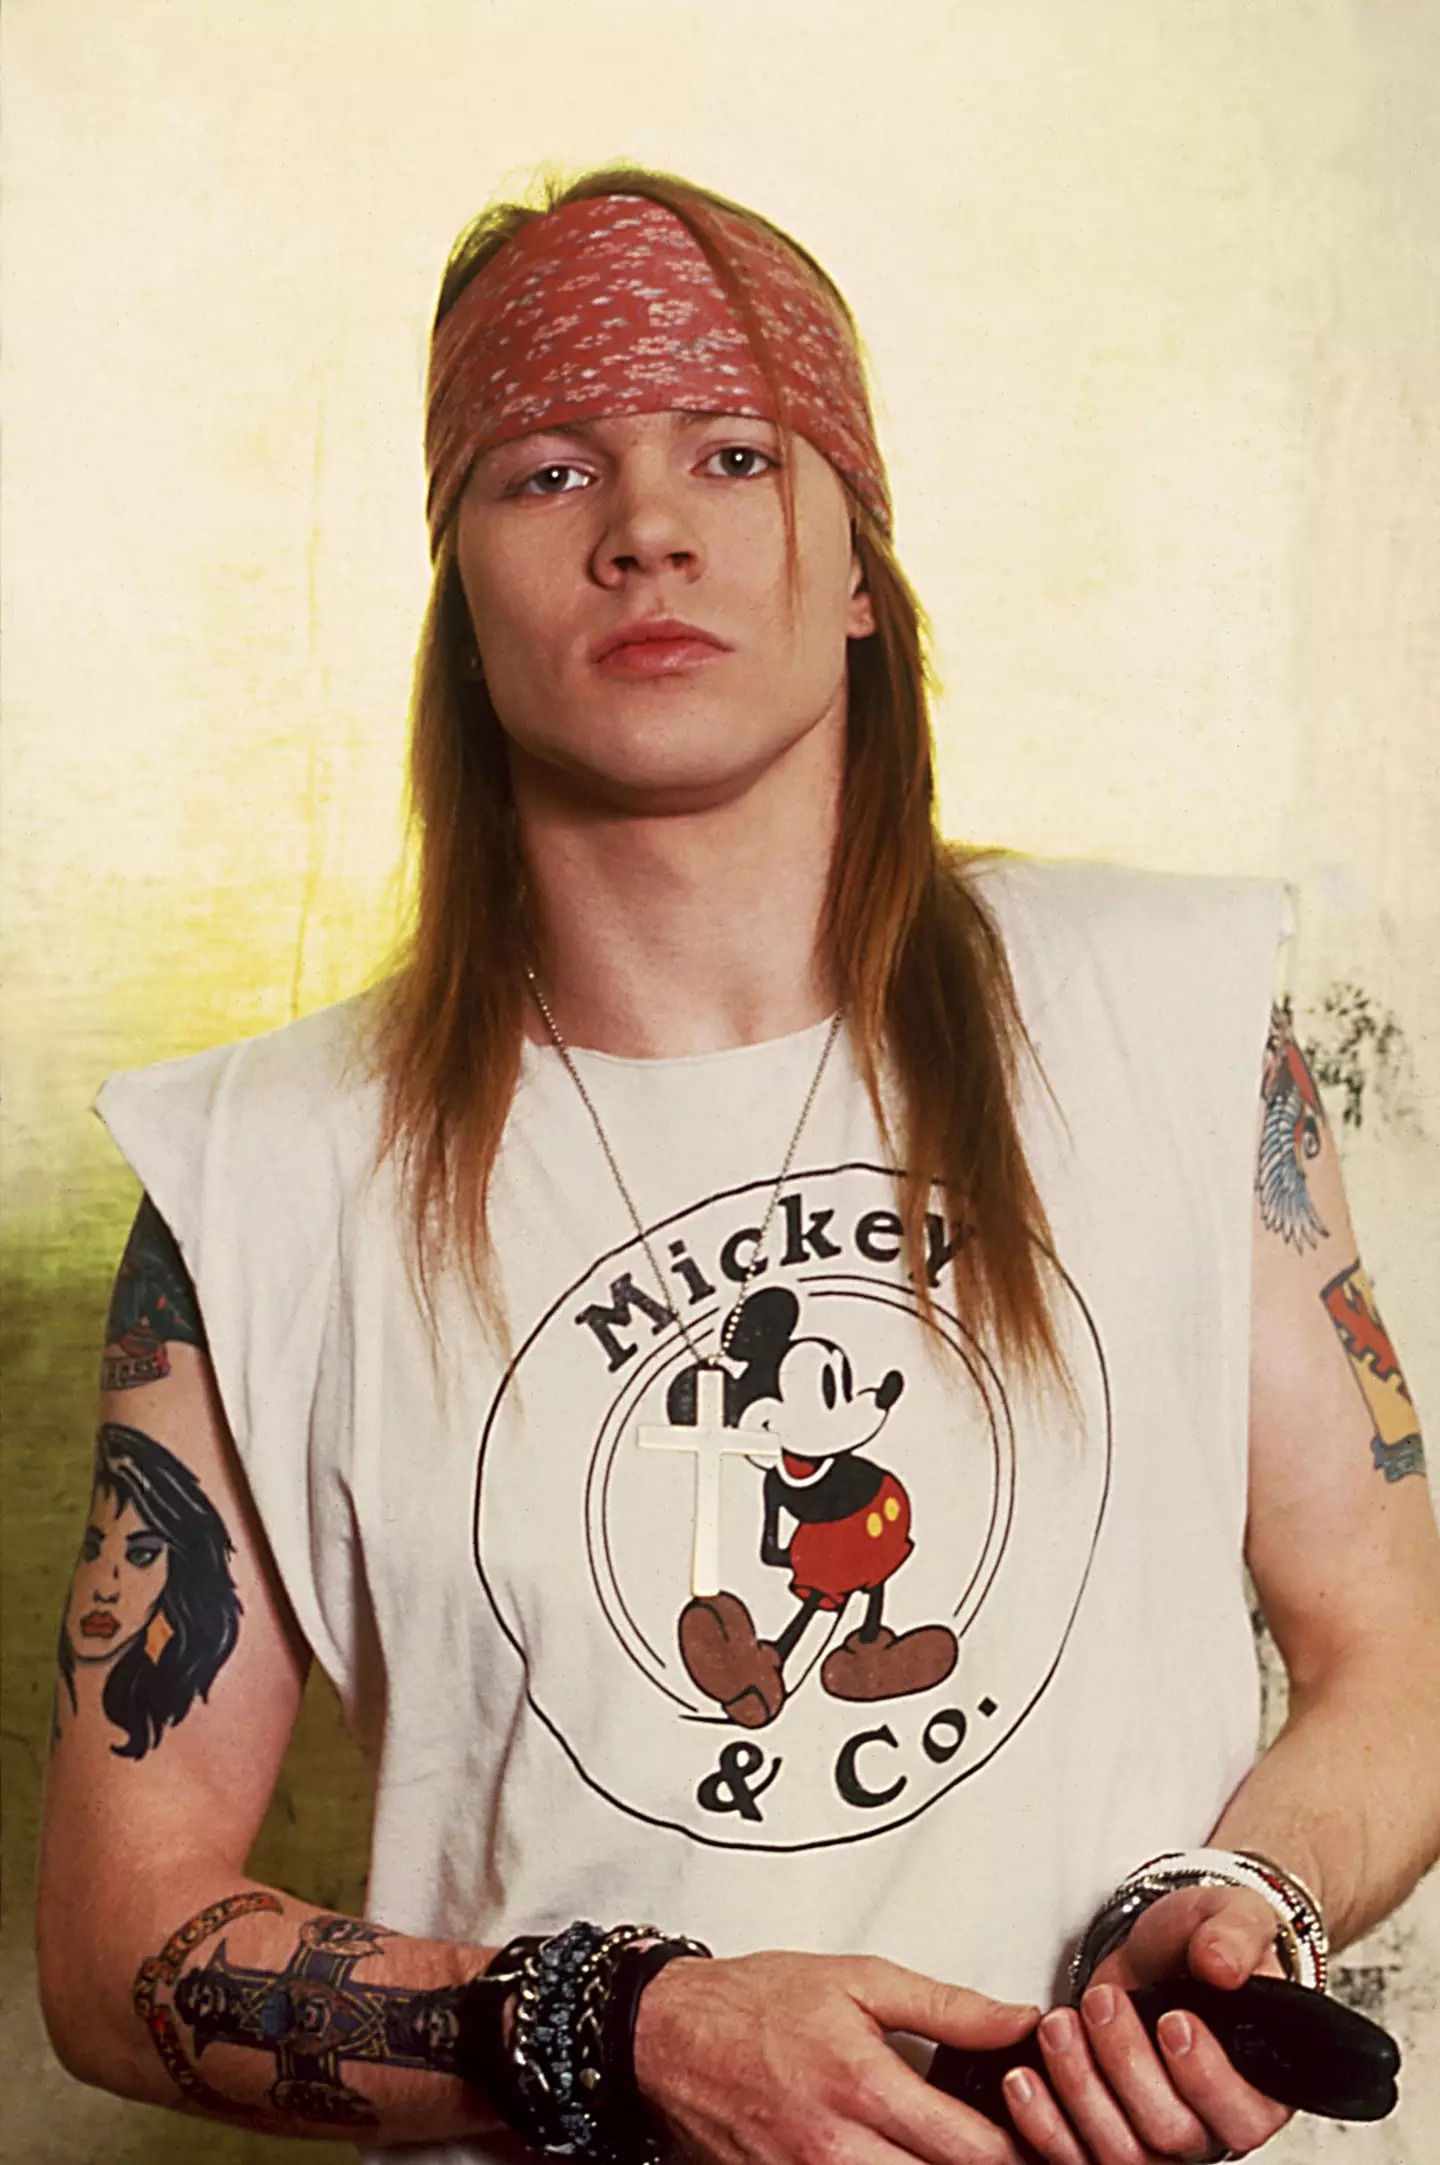 Axl Rose has defended his lyrics on numerous occasions.